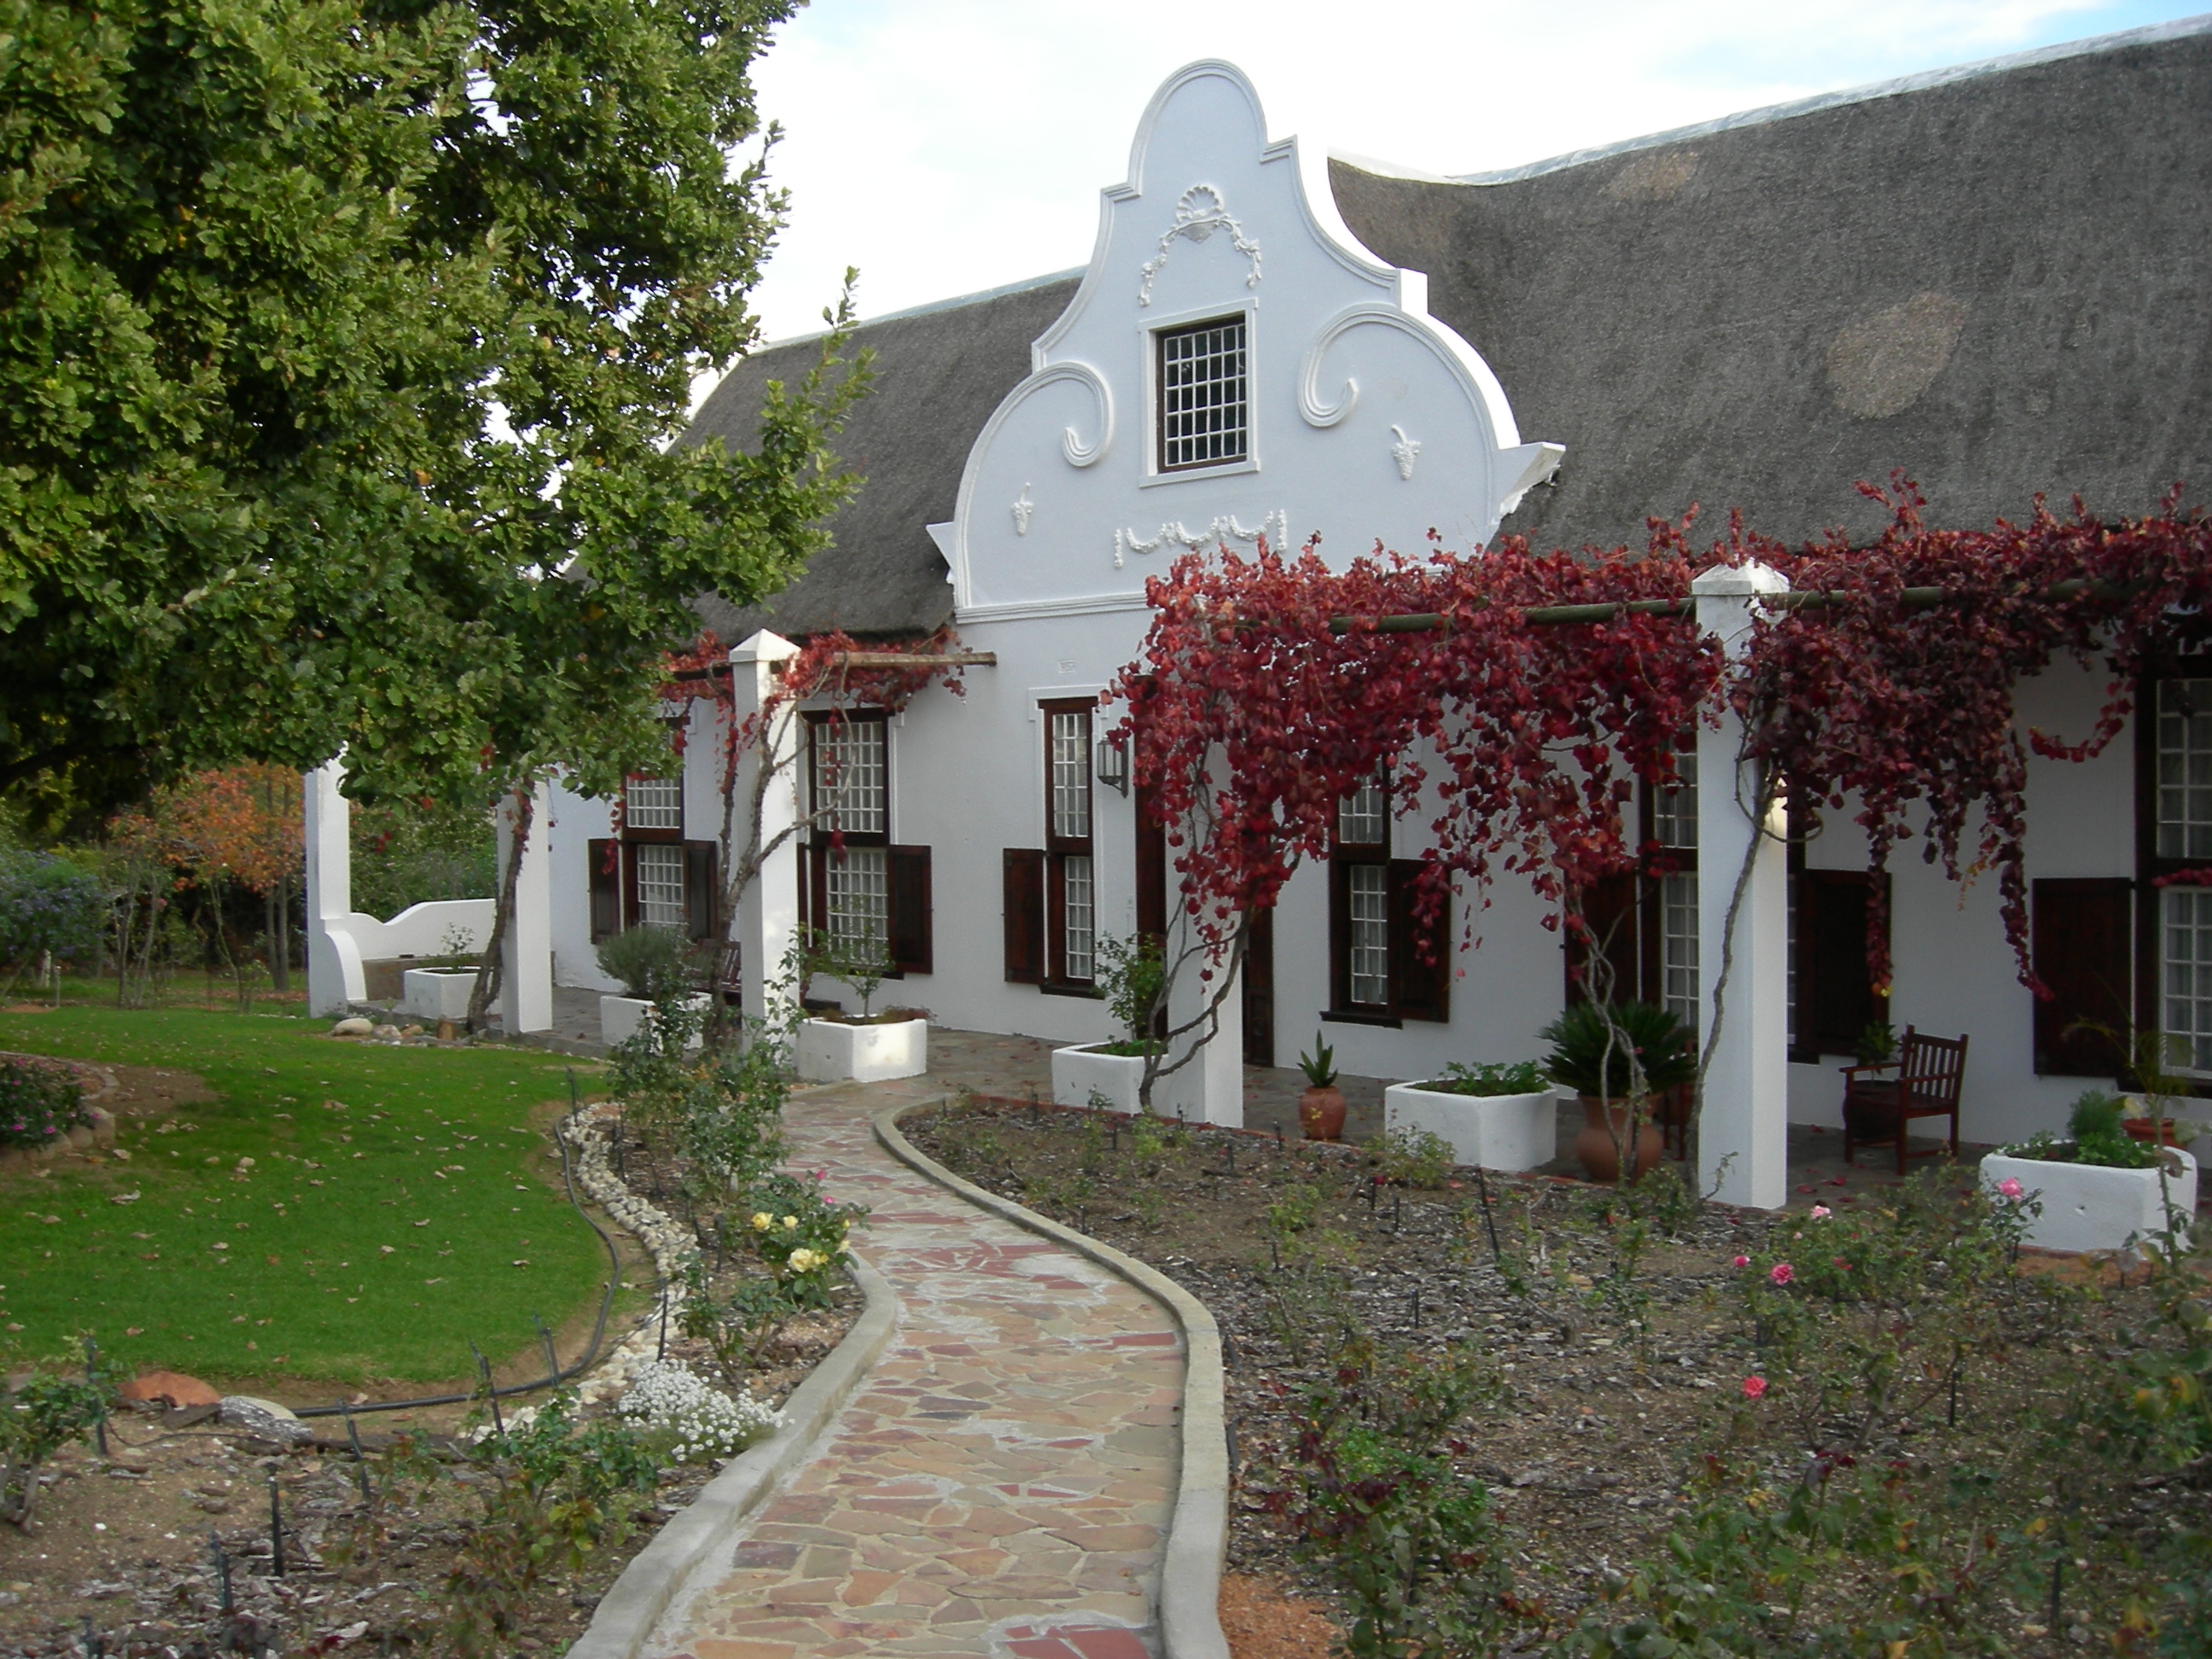 File:Old house in Tulbagh.jpg - Wikimedia Commons